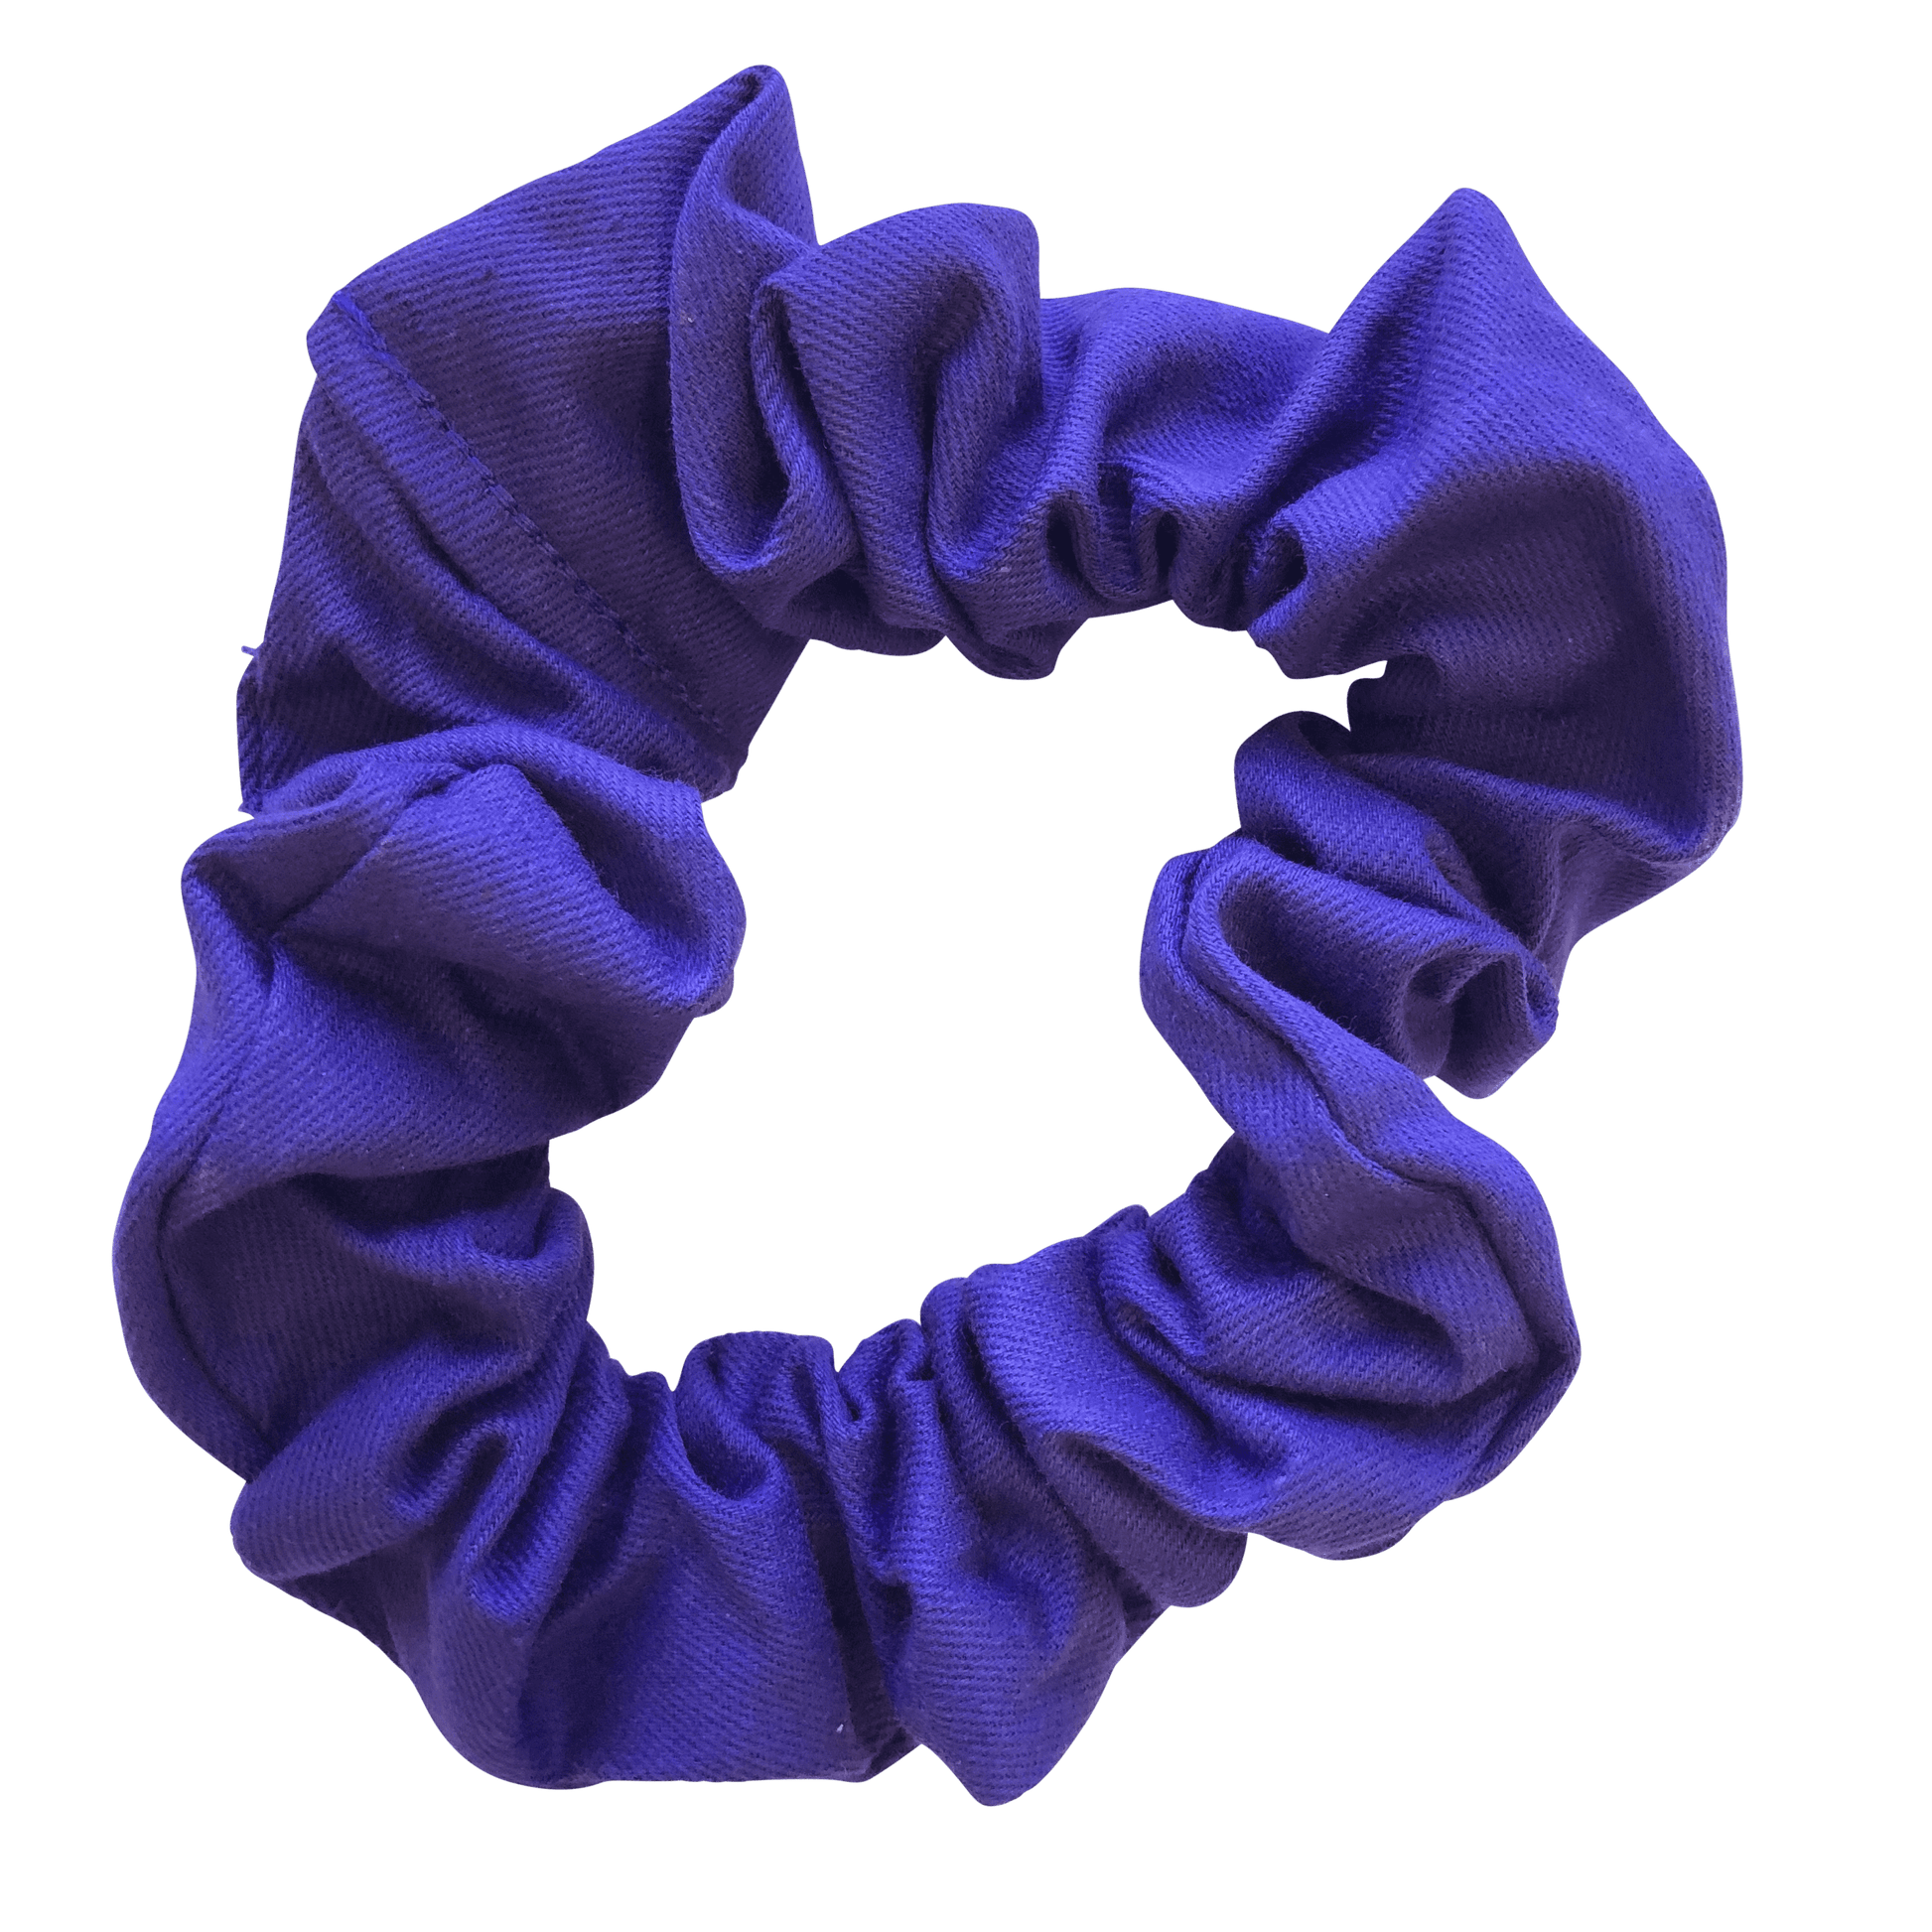 Purple Hair Accessories - Ponytails and Fairytales